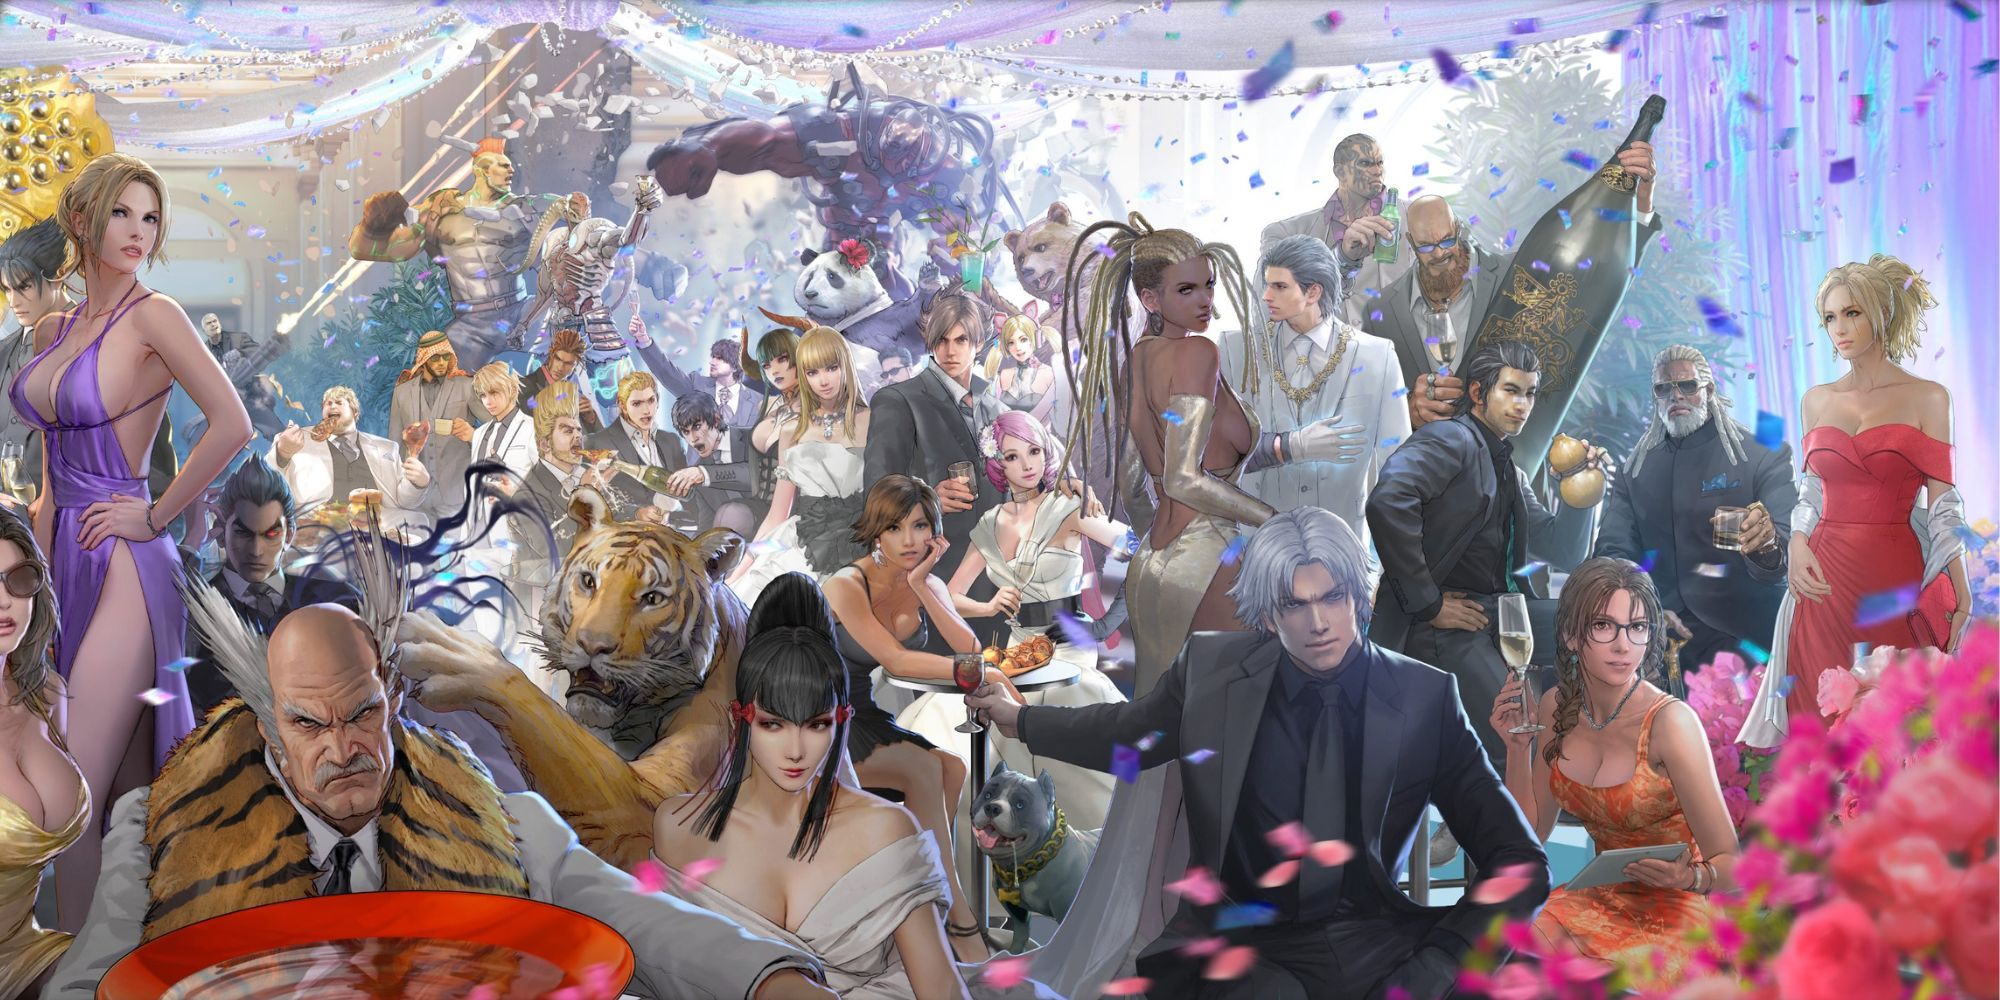 Image shows a party attended by characters from the Tekken franchise.